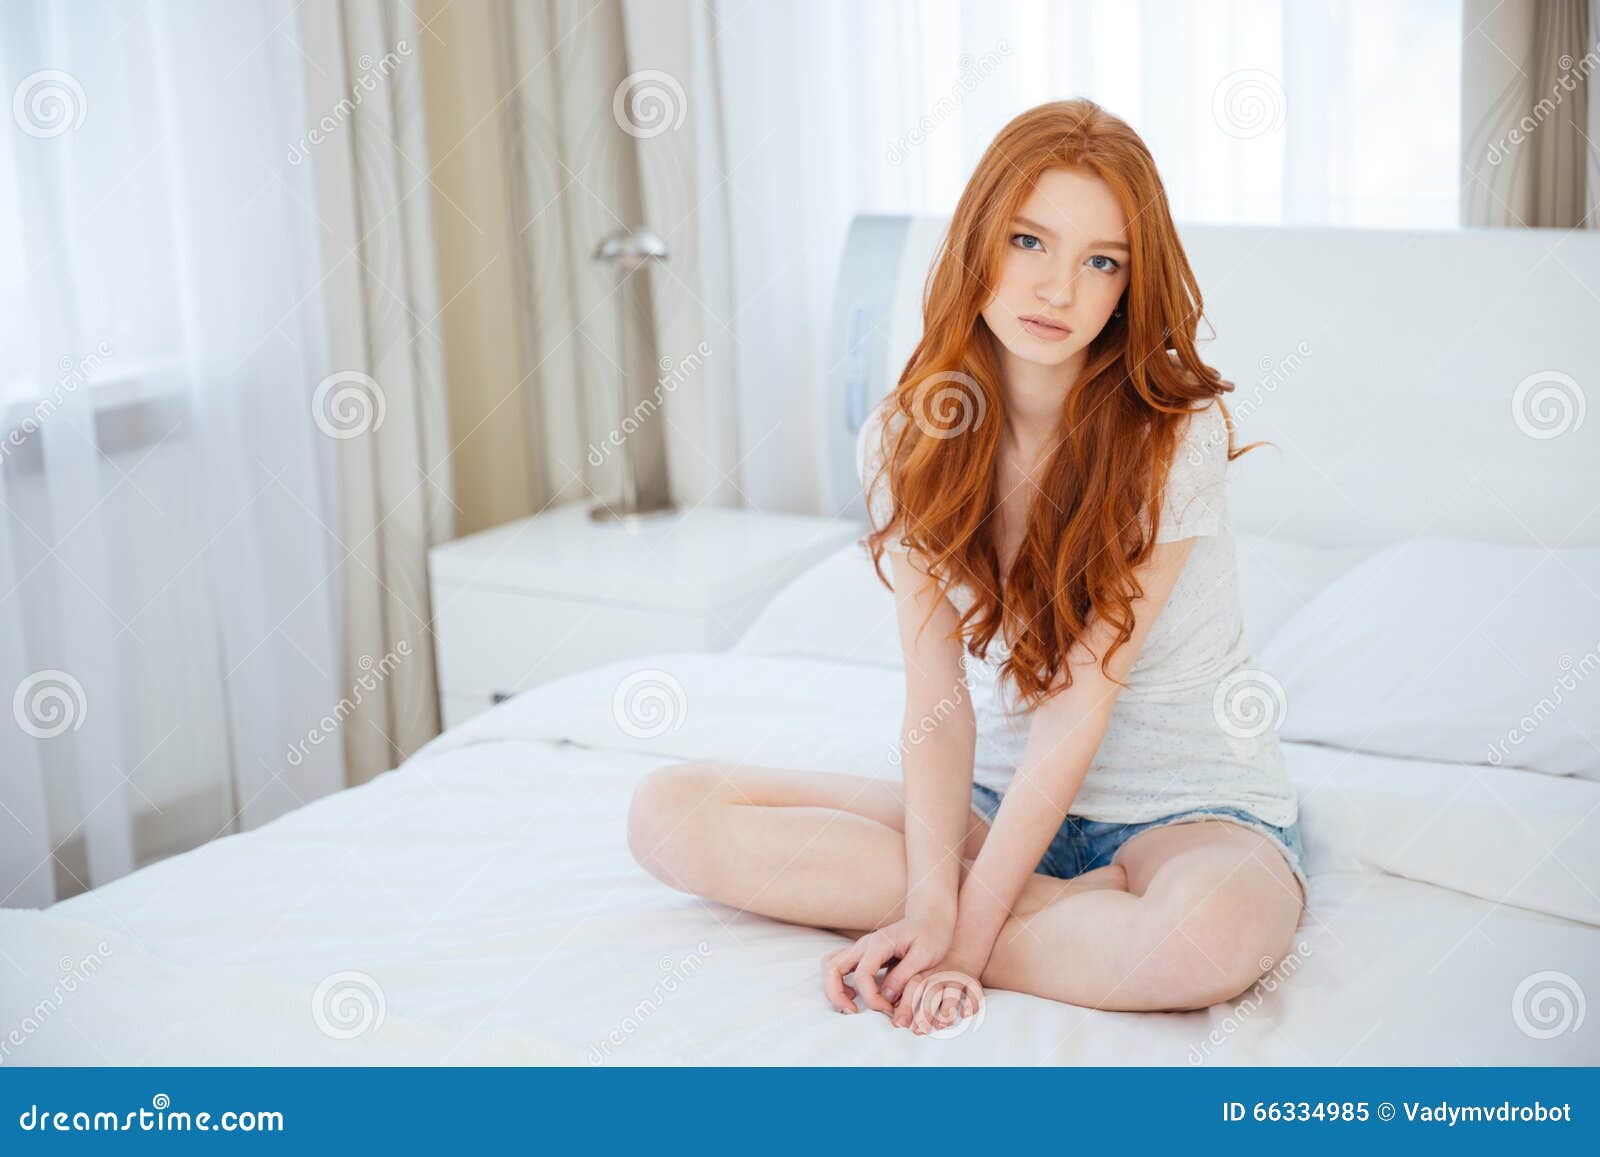 Redhead In Bed 25